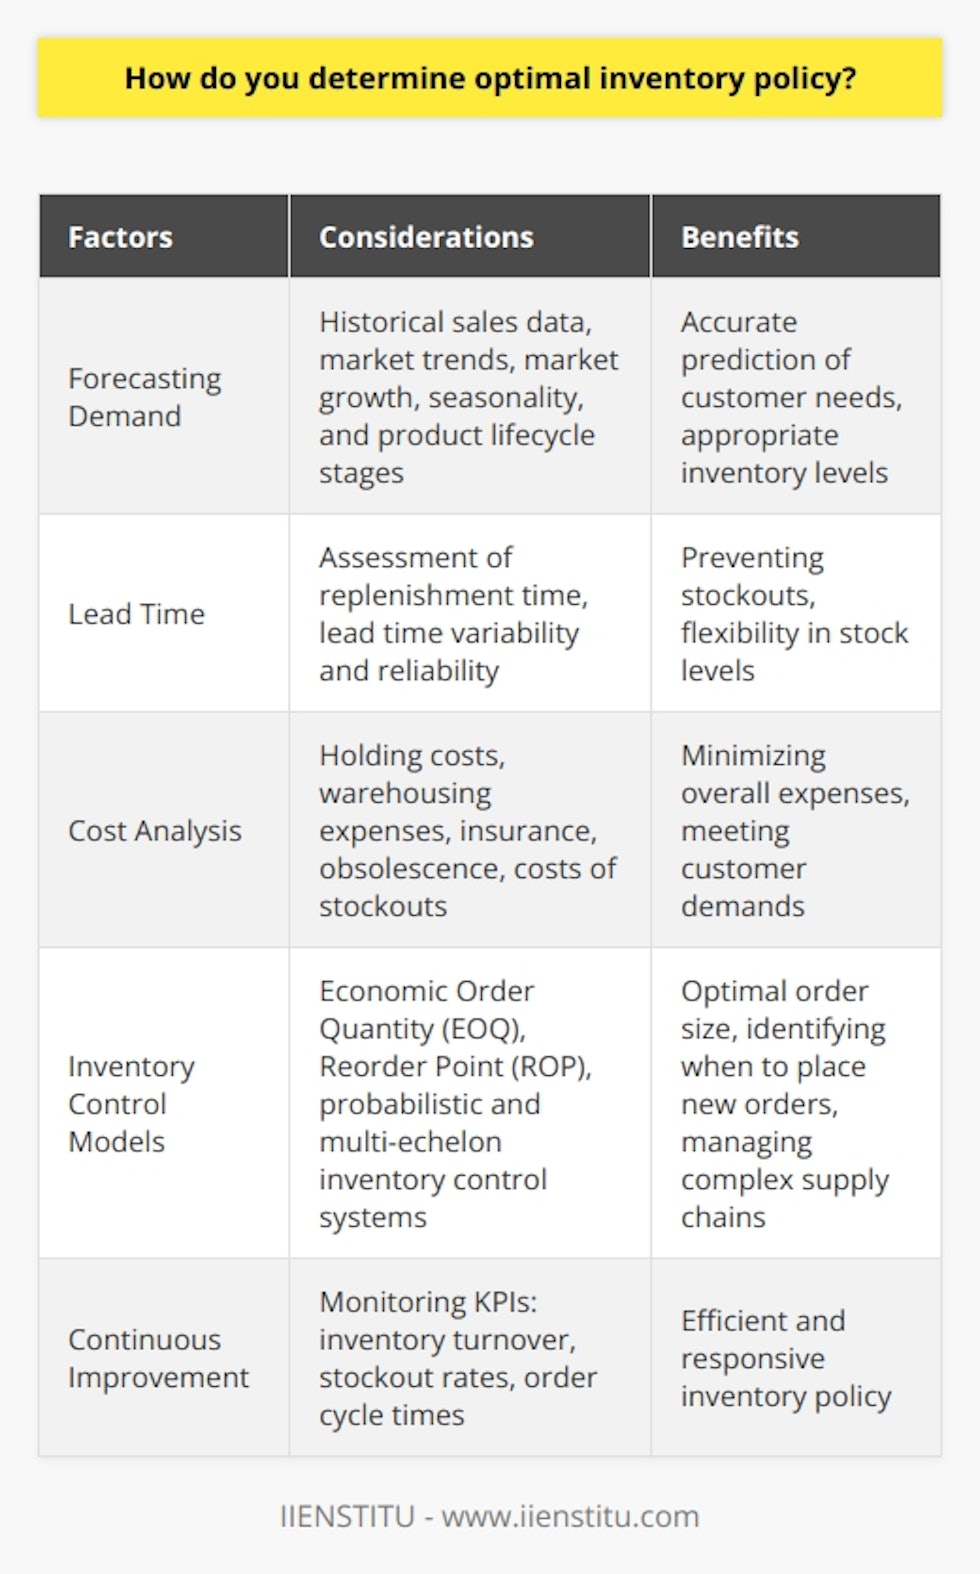 Determining the optimal inventory policy is crucial for businesses to efficiently manage inventory and meet customer demands. By considering various factors such as demand, lead time, and costs, businesses can strike the right balance and minimize overall expenses while still fulfilling customer needs.Forecasting product demand is a fundamental aspect of establishing an optimal inventory policy. By analyzing historical sales data and market trends, businesses can accurately predict customer needs and maintain appropriate inventory levels. Taking into account factors like market growth, seasonality, and product lifecycle stages further refines demand forecasts.Lead time is another critical factor to consider when determining an inventory policy. Businesses need to assess the time required to replenish stock. Longer lead times may require higher inventory levels to prevent stockouts, while shorter lead times offer greater flexibility and allow for lower stock levels. Calculating lead time variability and reliability ensures that a buffer stock is maintained to mitigate any unforeseen delays.A comprehensive cost analysis plays a significant role in devising an optimal inventory policy. Businesses need to evaluate the costs associated with holding inventory, such as warehousing expenses, insurance, and obsolescence. These costs need to be weighed against the costs of stockouts, such as lost sales and customer dissatisfaction. Striking a balance between these costs helps establish an inventory policy that minimizes overall expenses while still meeting customer demands.Employing inventory control models further enhances the optimal inventory policy. Techniques like the Economic Order Quantity (EOQ) model determine the optimal order size by minimizing holding and ordering costs. The Reorder Point (ROP) model identifies when a new order should be placed based on demand and lead time. More advanced models, such as probabilistic and multi-echelon inventory control systems, can manage varying demand patterns and complex supply chains.Sustaining an optimal inventory policy requires continuous improvement and regular evaluation. Monitoring key performance indicators like inventory turnover, stockout rates, and order cycle times allows for adjustments to be made as market conditions change. This commitment to continuous improvement ensures that the inventory policy remains efficient and responsive.To summarize, determining the optimal inventory policy involves accurately forecasting demand, considering lead time, conducting a comprehensive cost analysis, utilizing inventory control models, and continuously improving the policy. By adopting a holistic approach that considers these factors, businesses can minimize costs while satisfying customer demands.